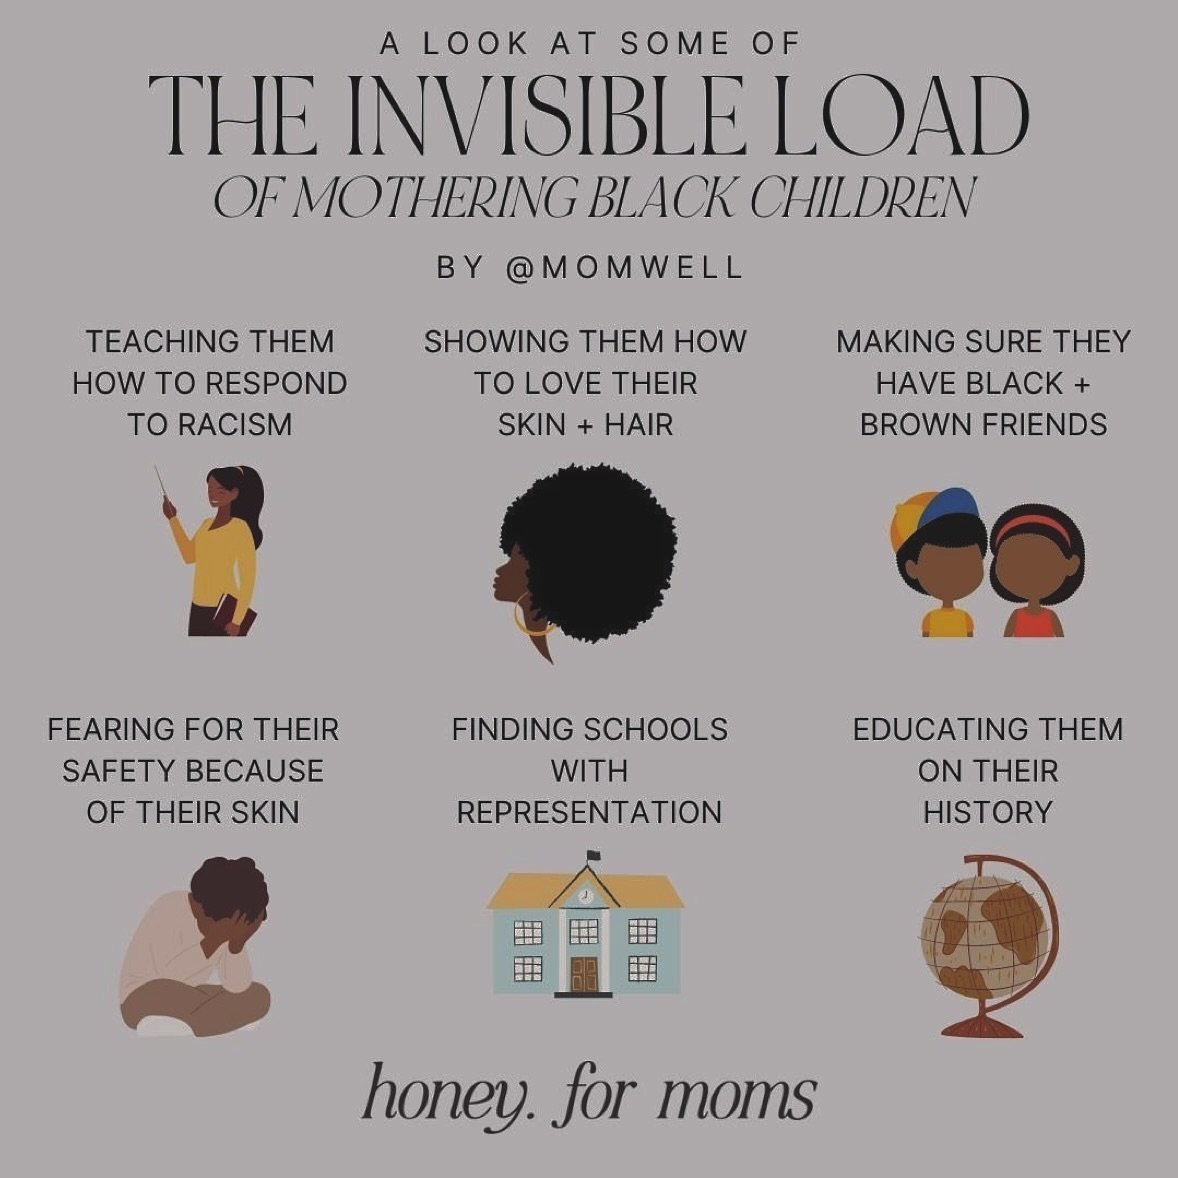 Amplifying Voices. 

Repost from @blackmentalwellness
&bull;
During #BlackMaternalHealthWeek it is also important to acknowledge the invisible load of mothering Black children. 

How can we better support Black mothers?

Repost from @honeyformoms @mo